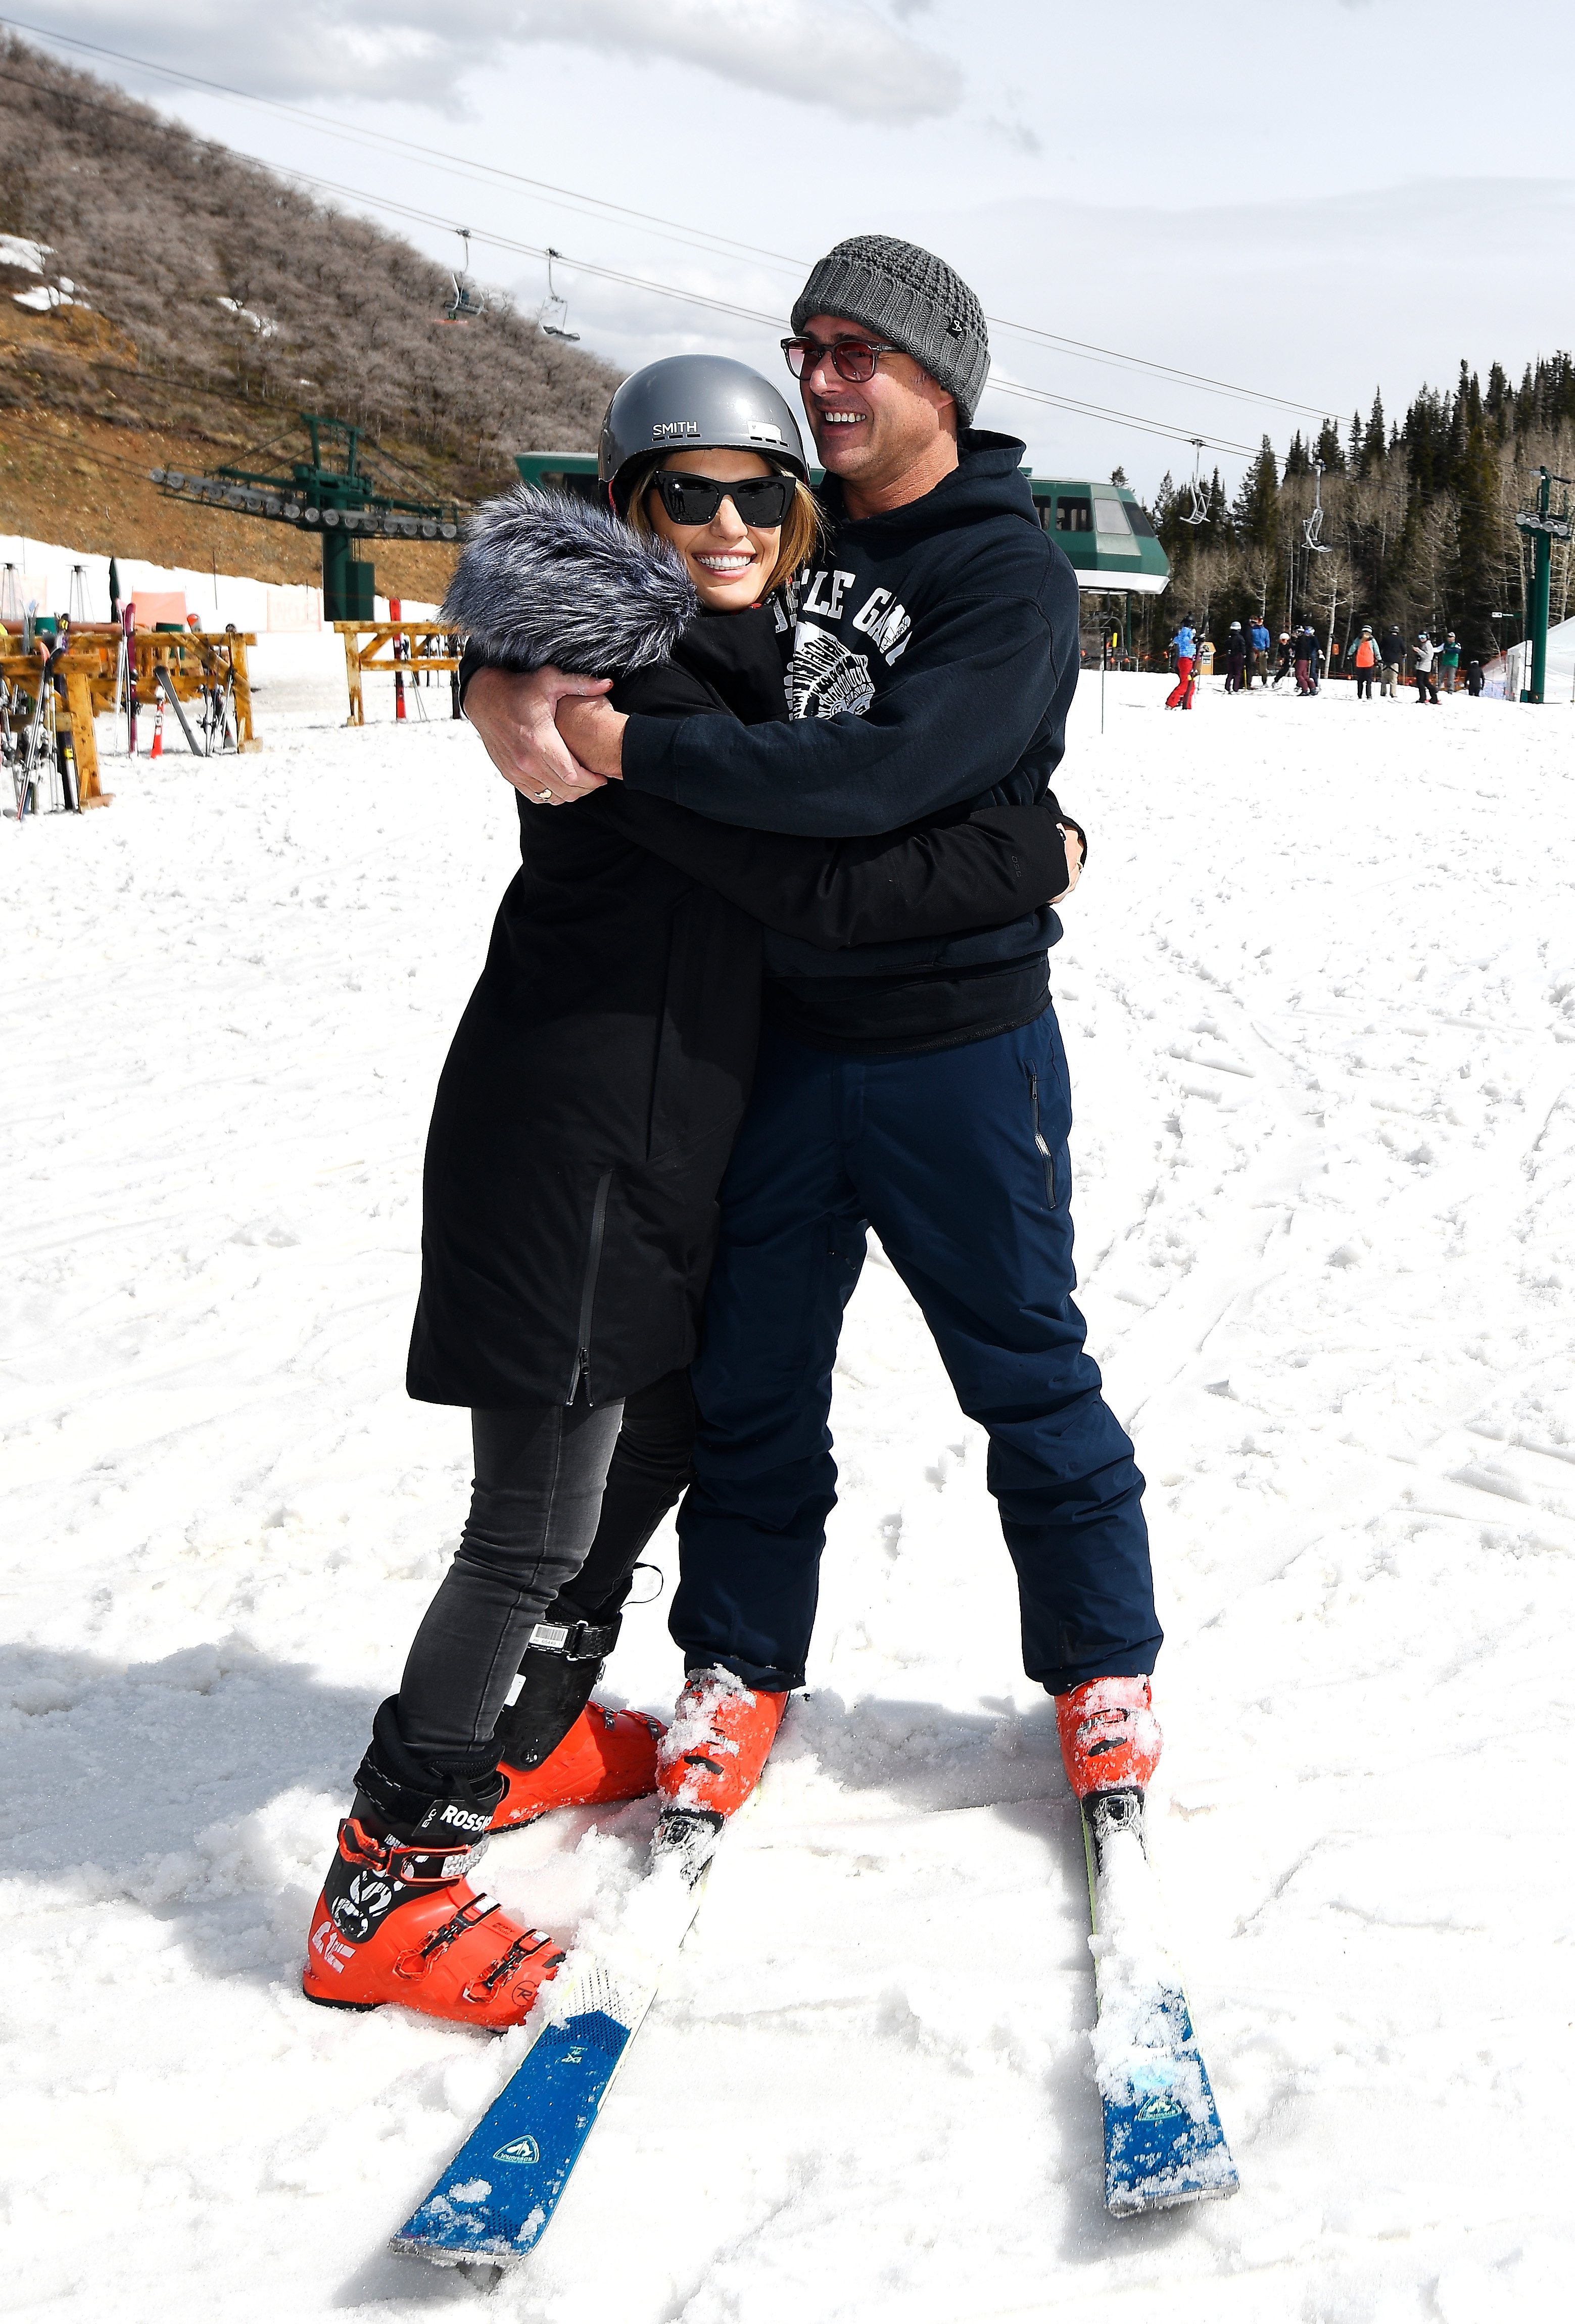 Ashley Cruger and Taylor Kinney attend Operation Smile's 10th Annual Park City Ski Challenge Presented By The St. Regis Deer Valley & Deer Valley Resort at The St. Regis Deer Valley on April 2, 2022, in Park City, Utah. | Source: Getty Images